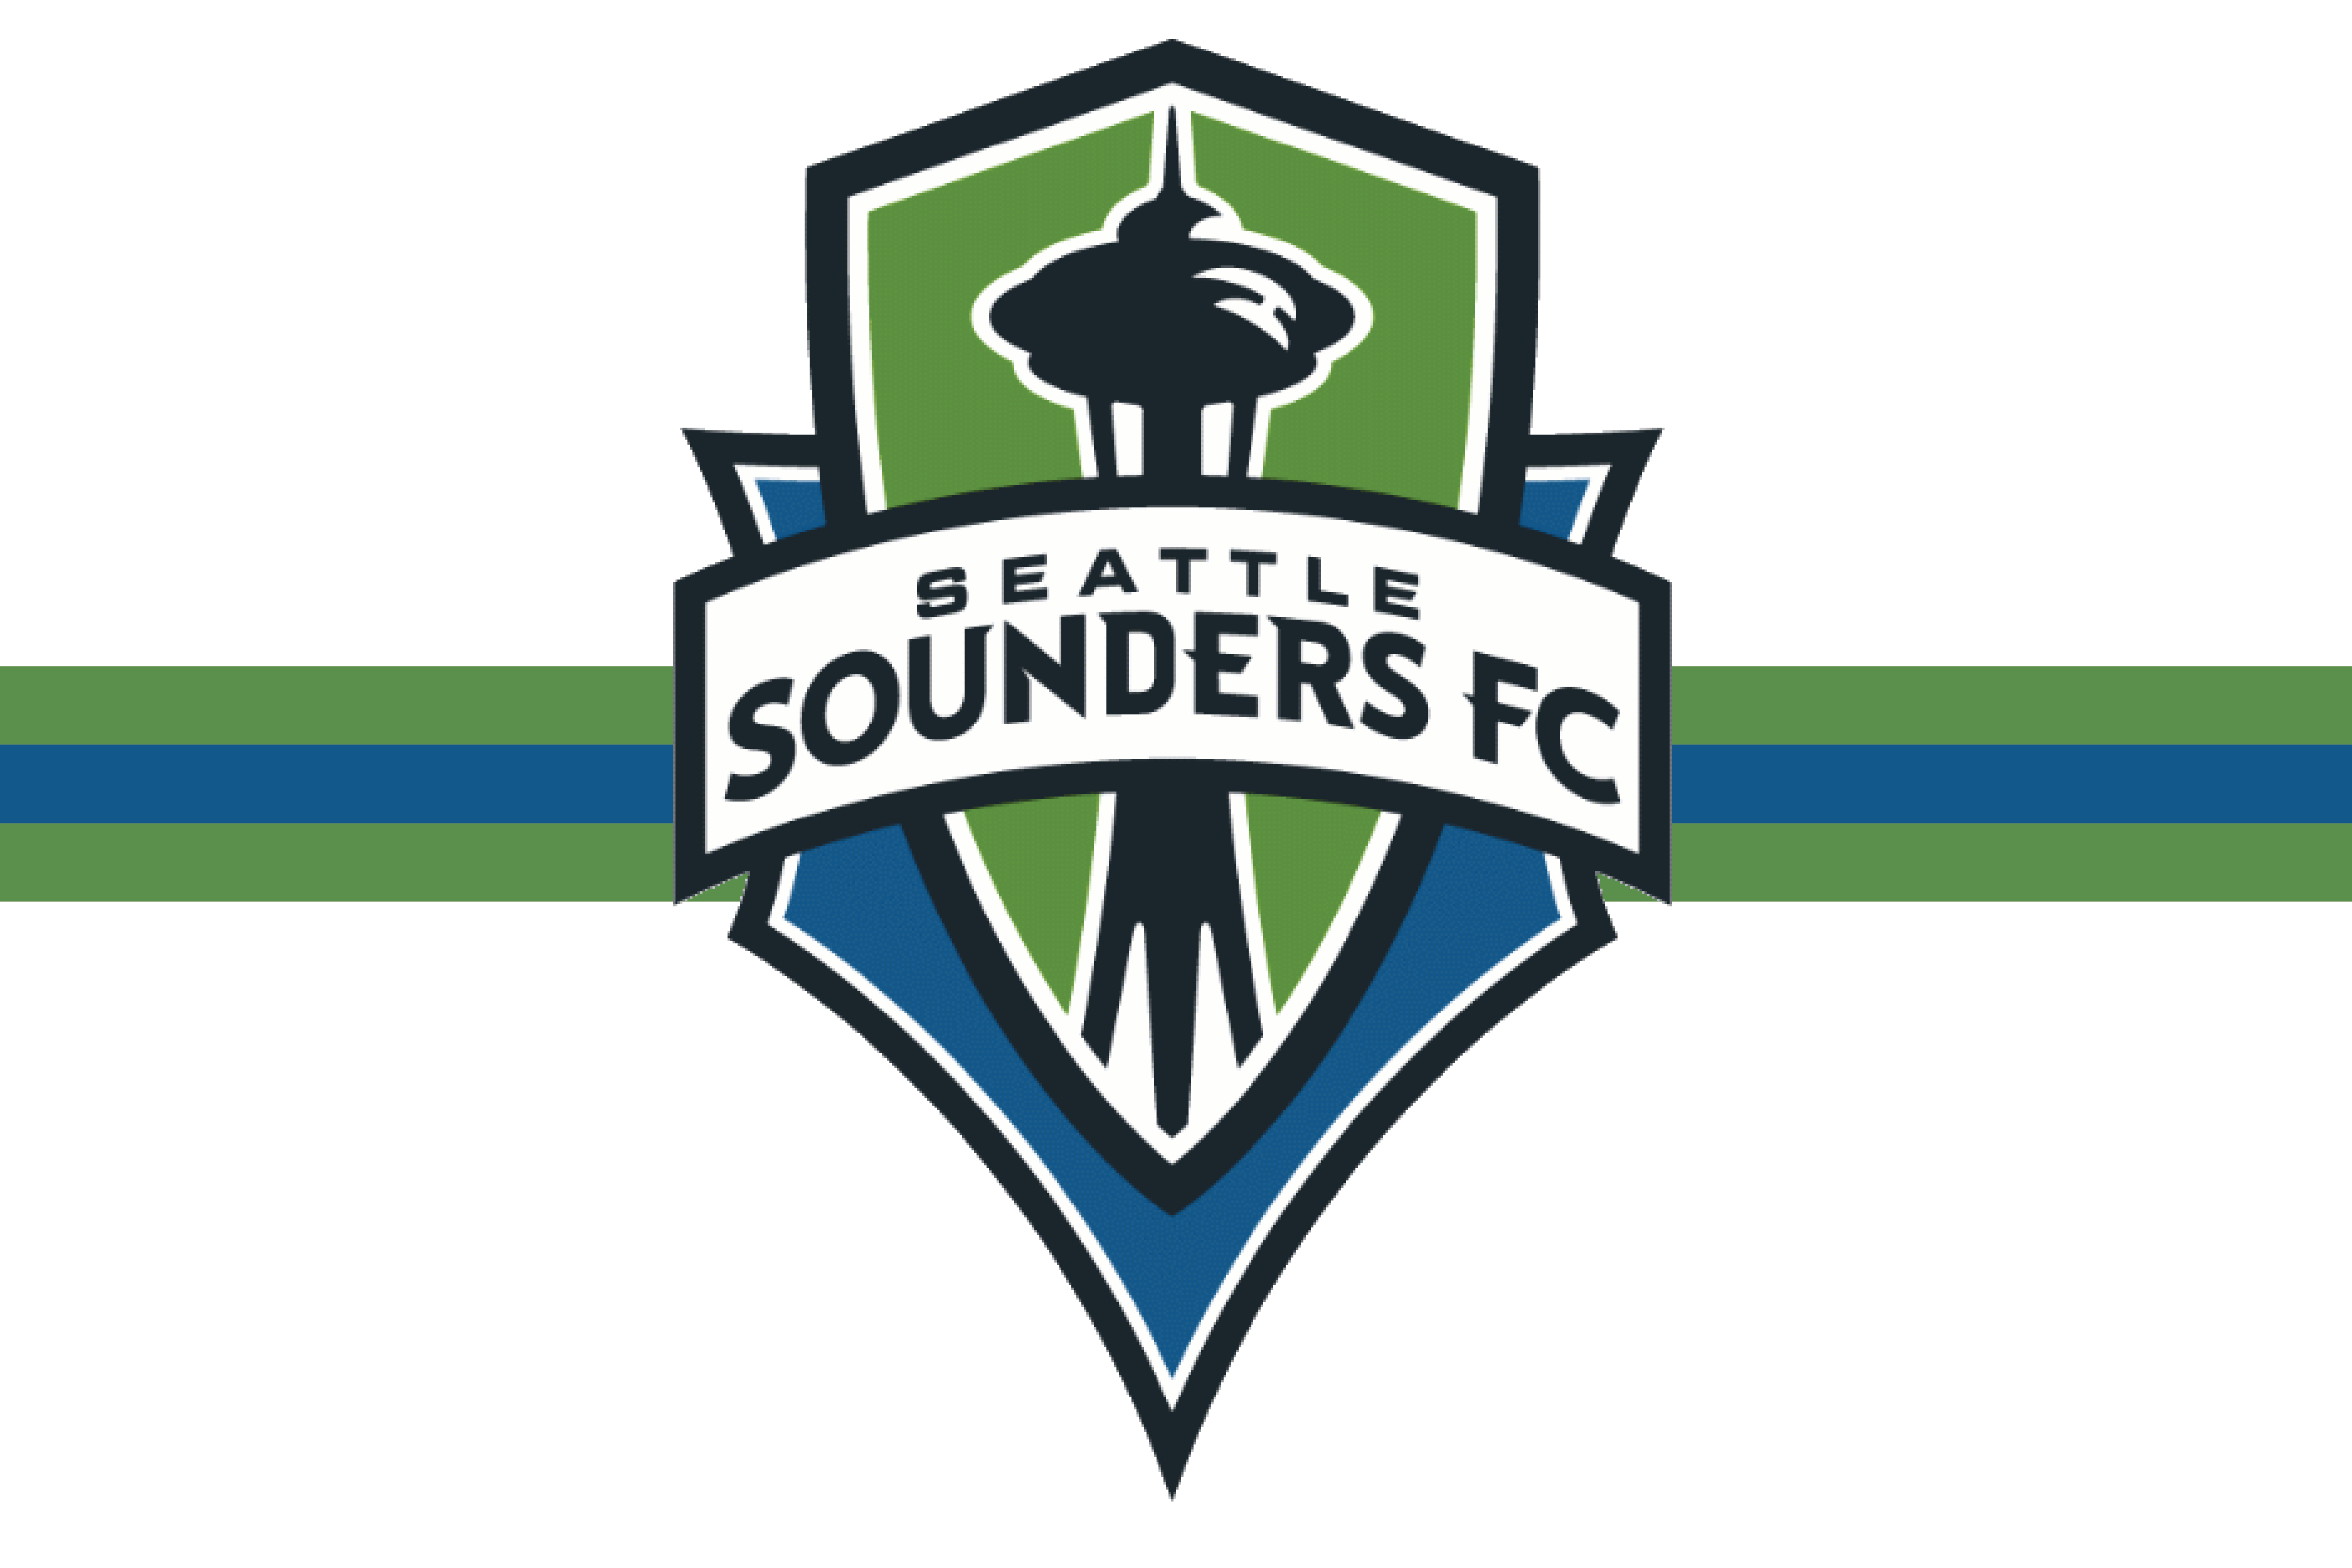 Seattle Sounders Fc Png Hdpng.com 3750 - Seattle Sounders Fc, Transparent background PNG HD thumbnail